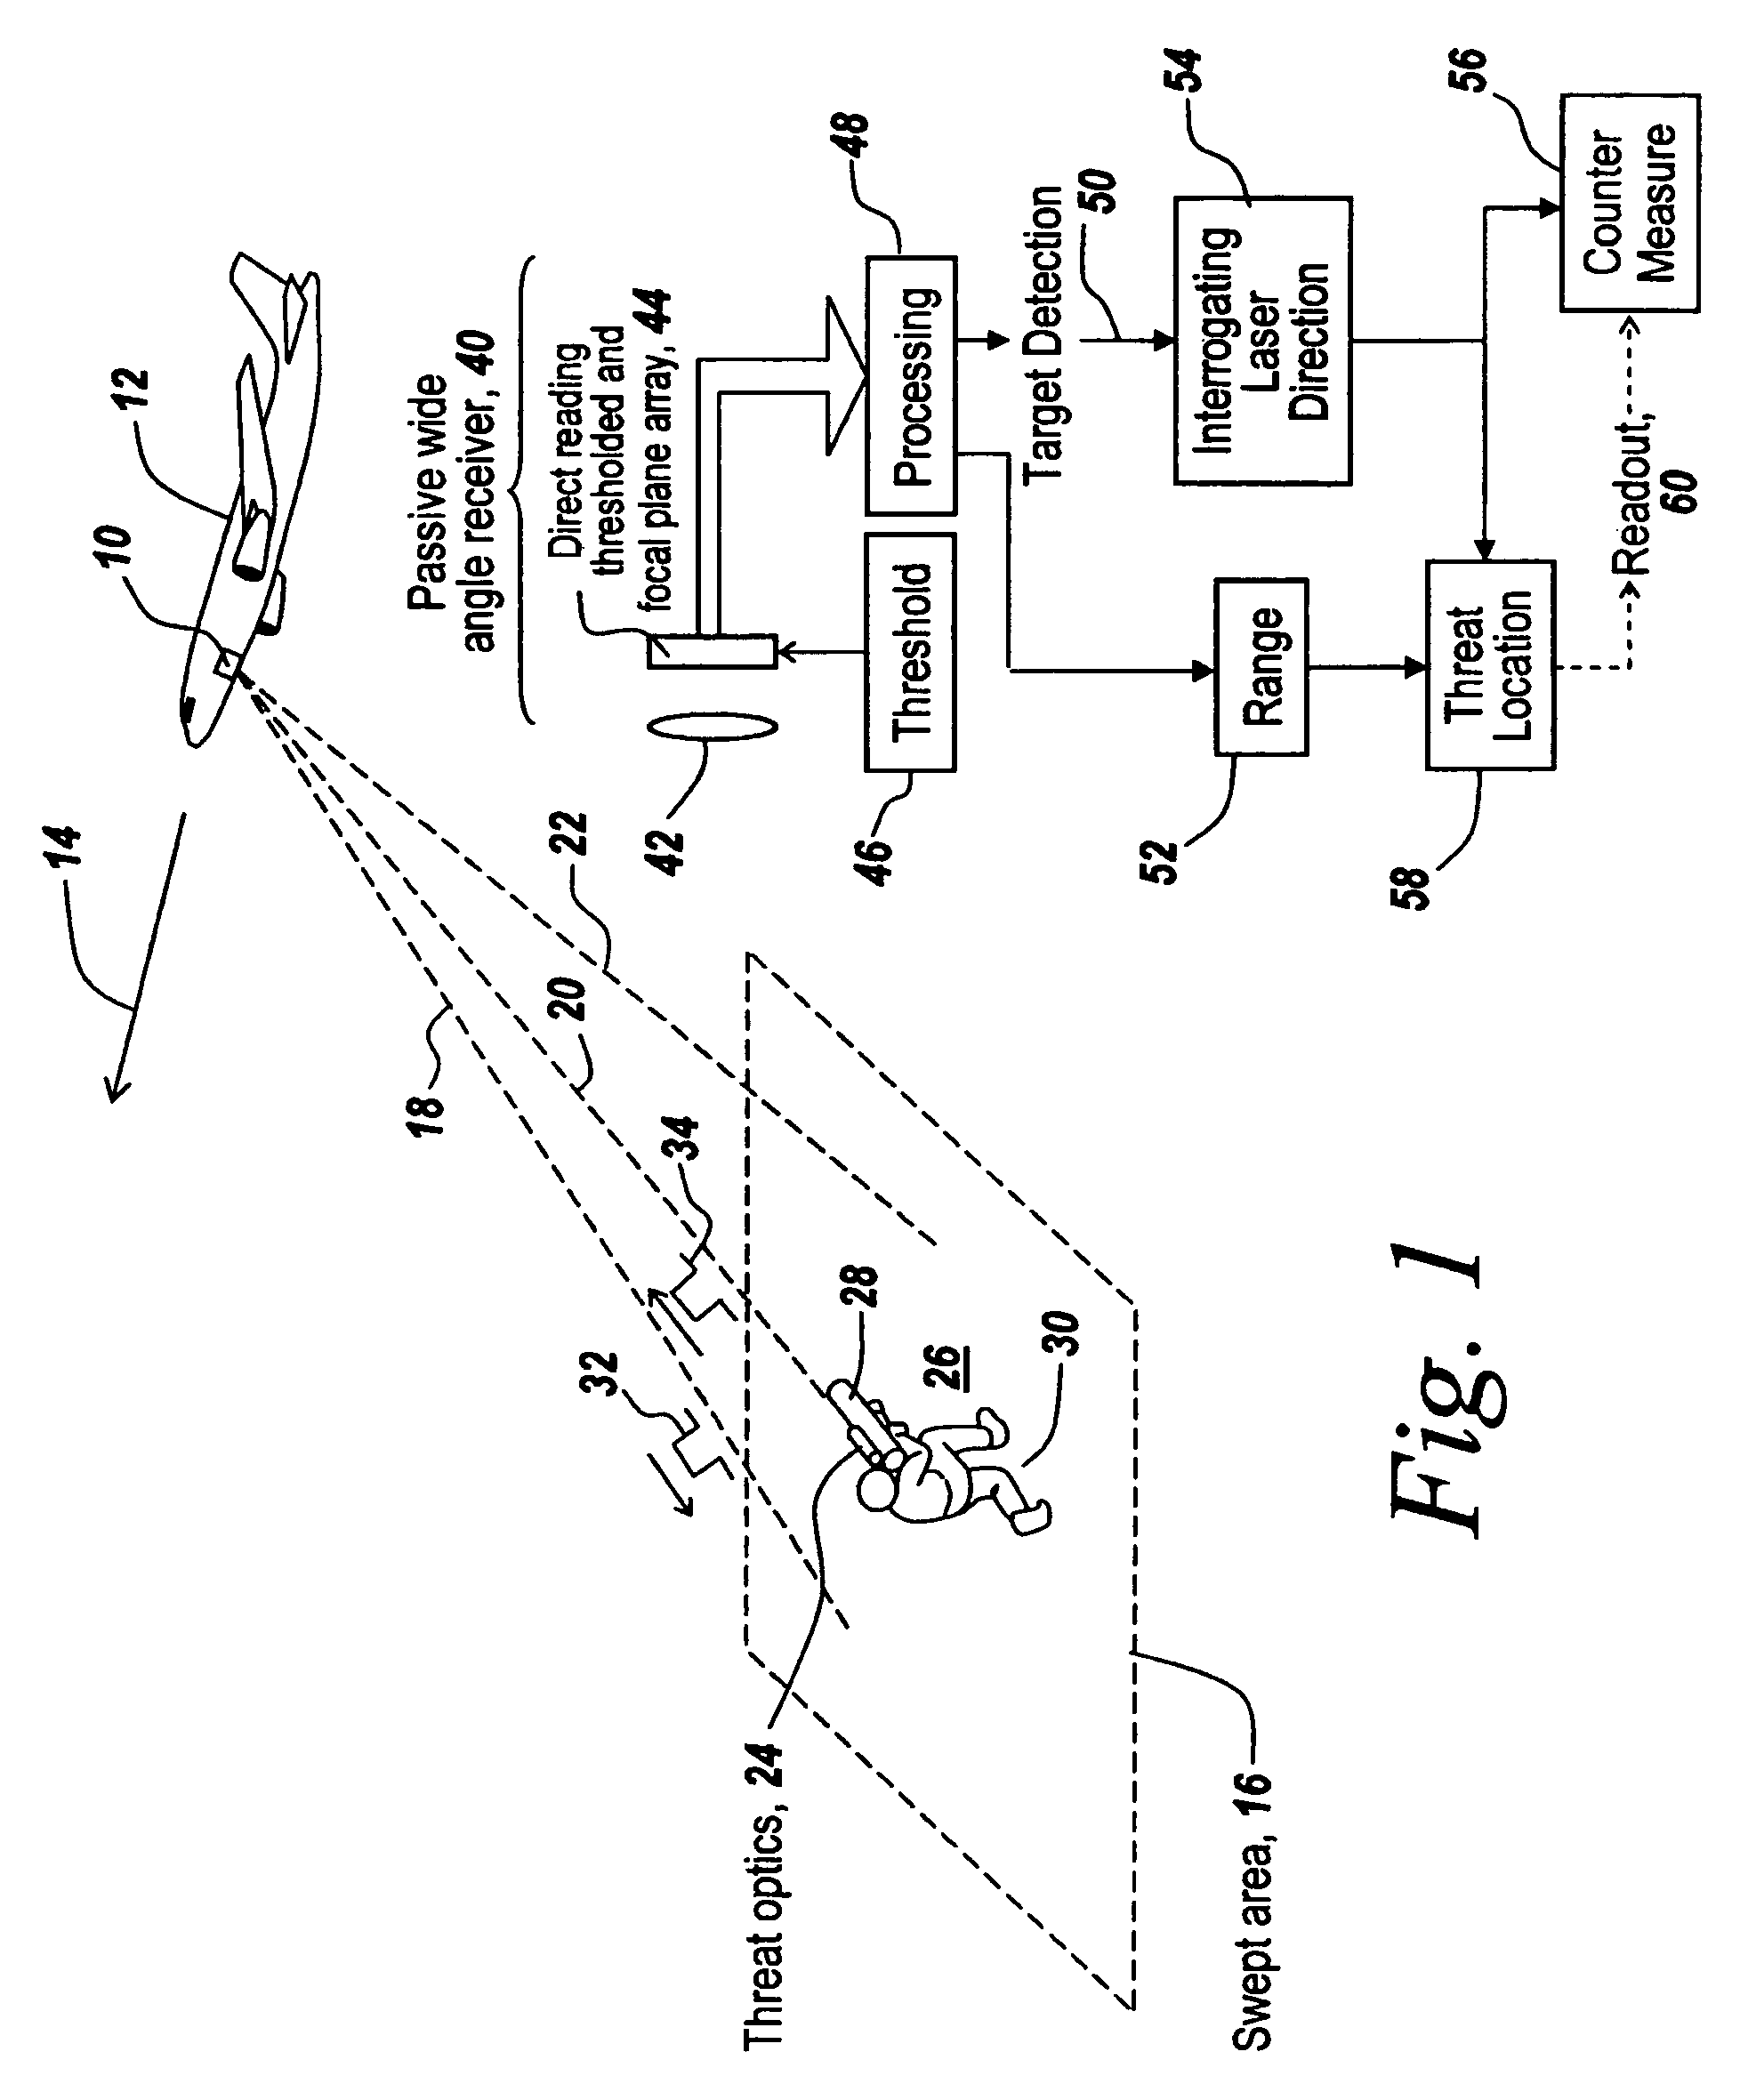 Active search sensor and a method of detection using non-specular reflections